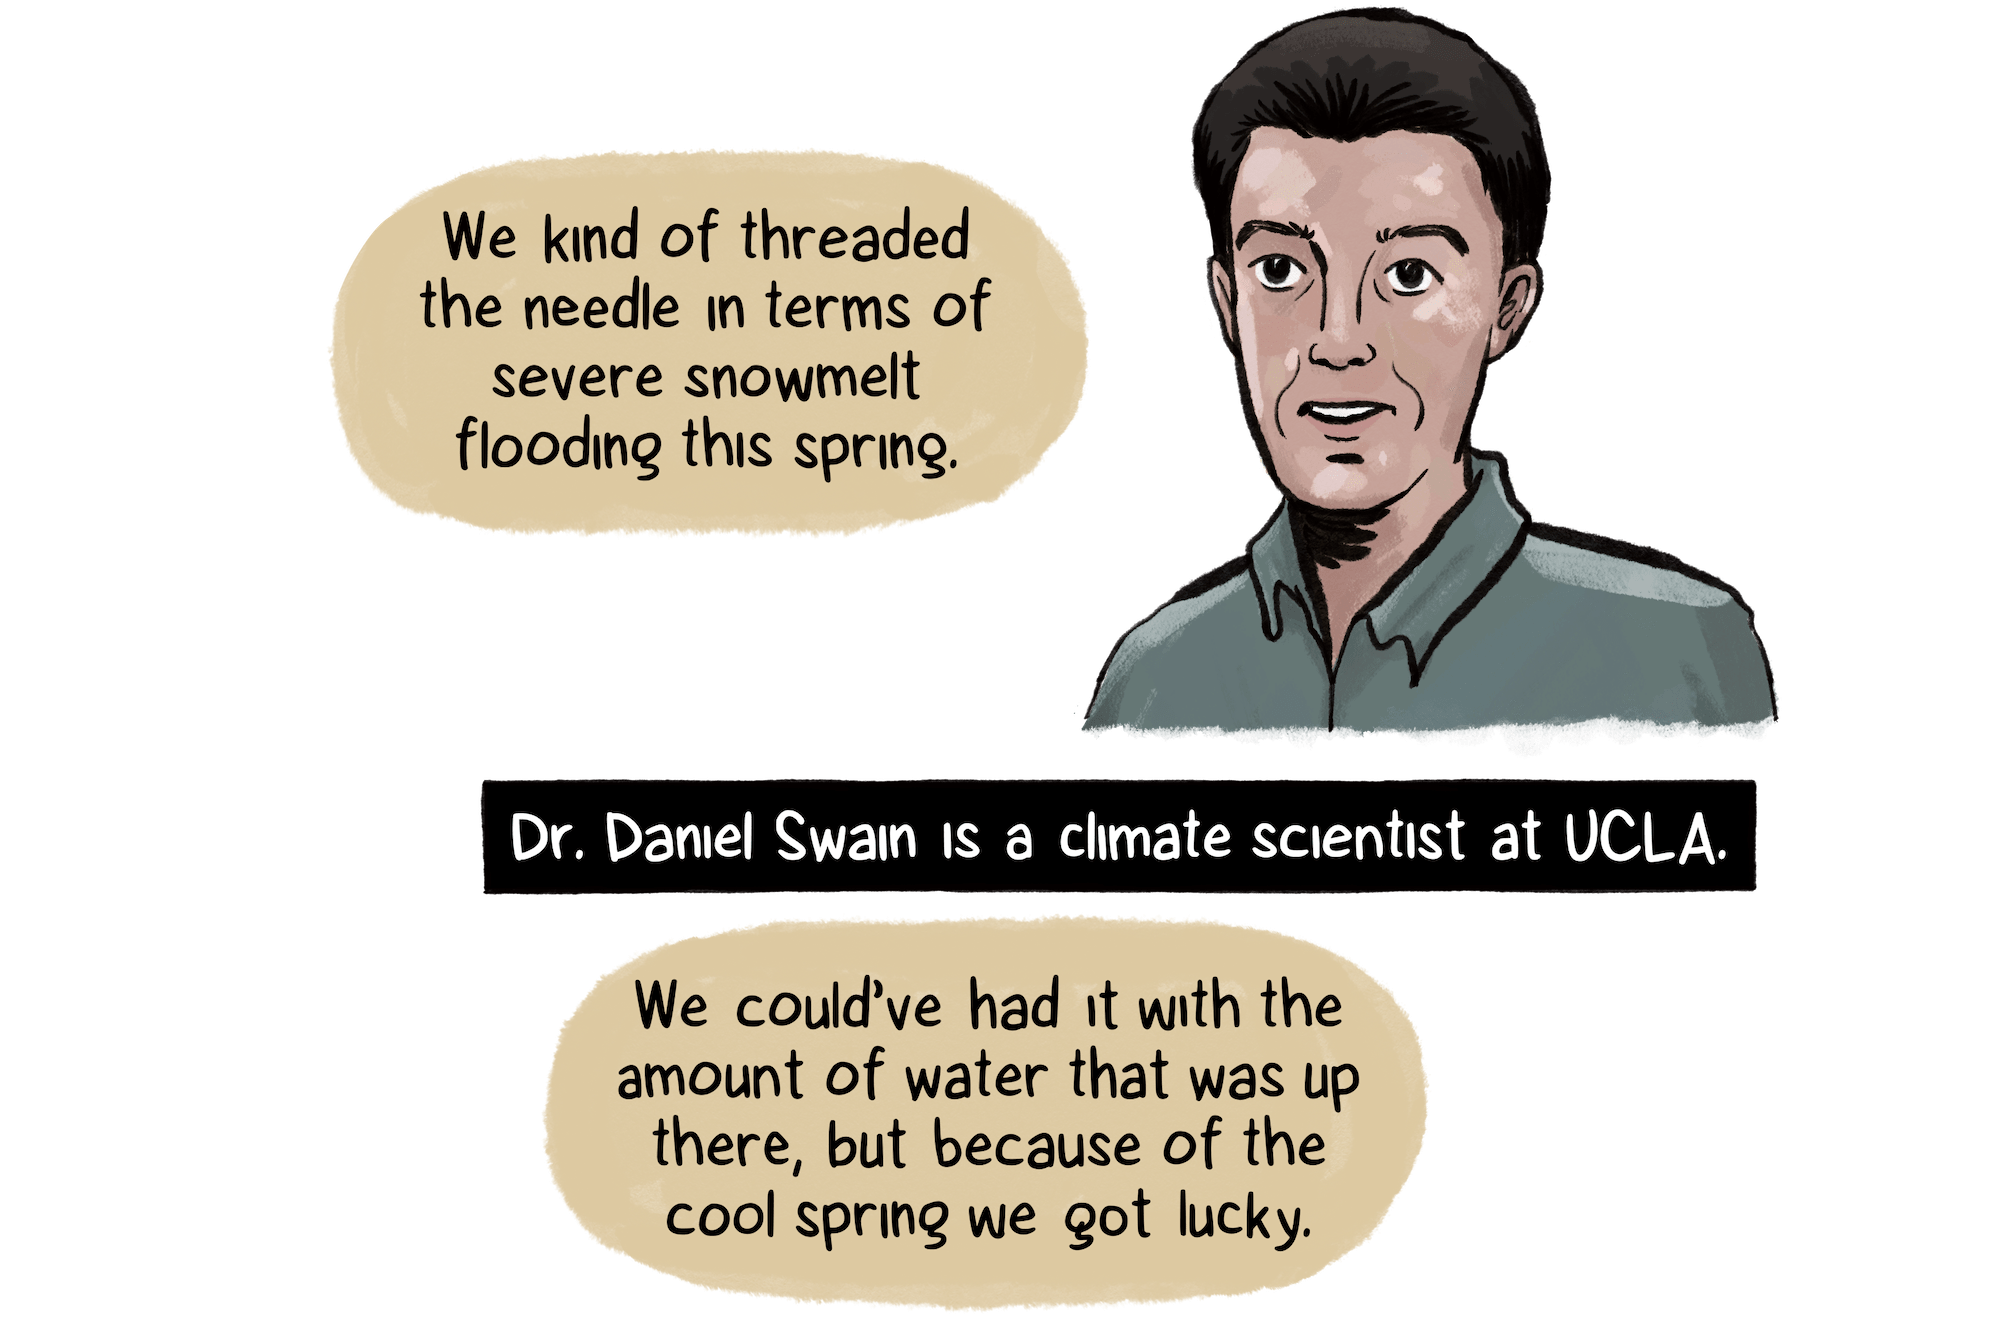 Dr. Daniel Swain, a man with short brown hair and light skin tone, who is a climate scientist at UCLA says, “We kind of threaded the needle in terms of severe snowmelt flooding this spring.” He says the water on the mountain is there, but that the area got lucky.